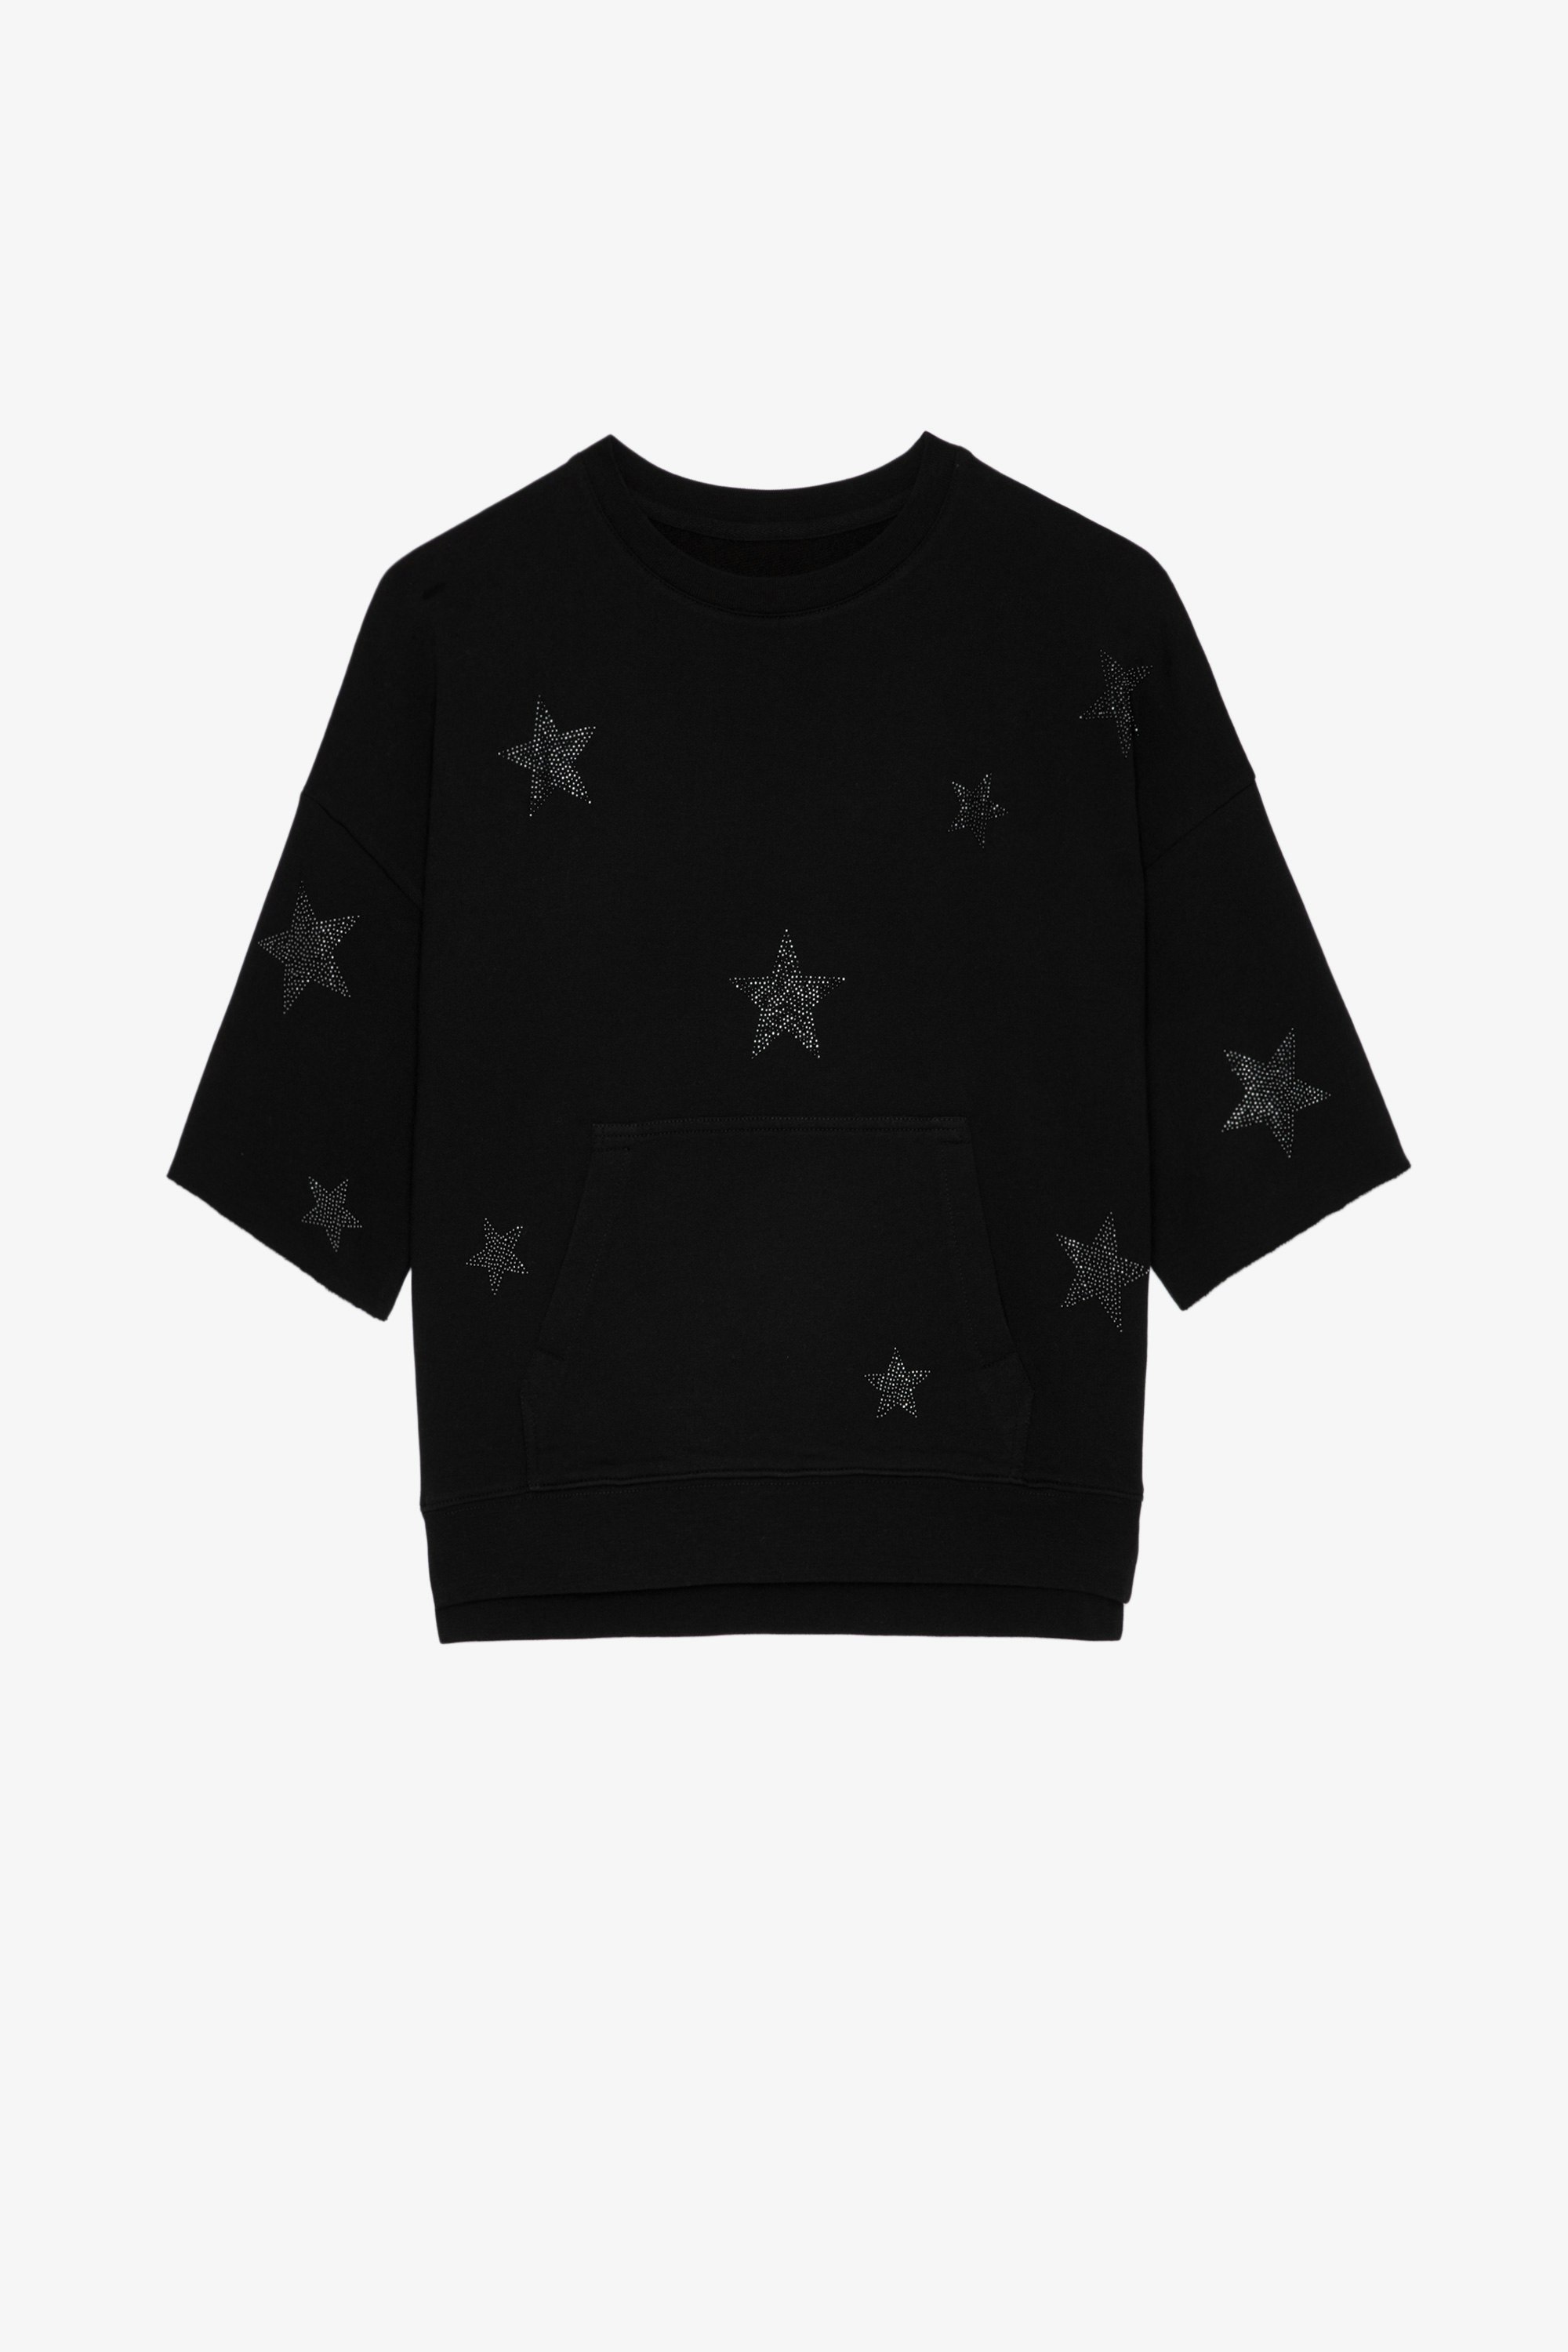 Kaly Stars Strass スウェット Women's cotton sweatshirt with crystal-embellished stars